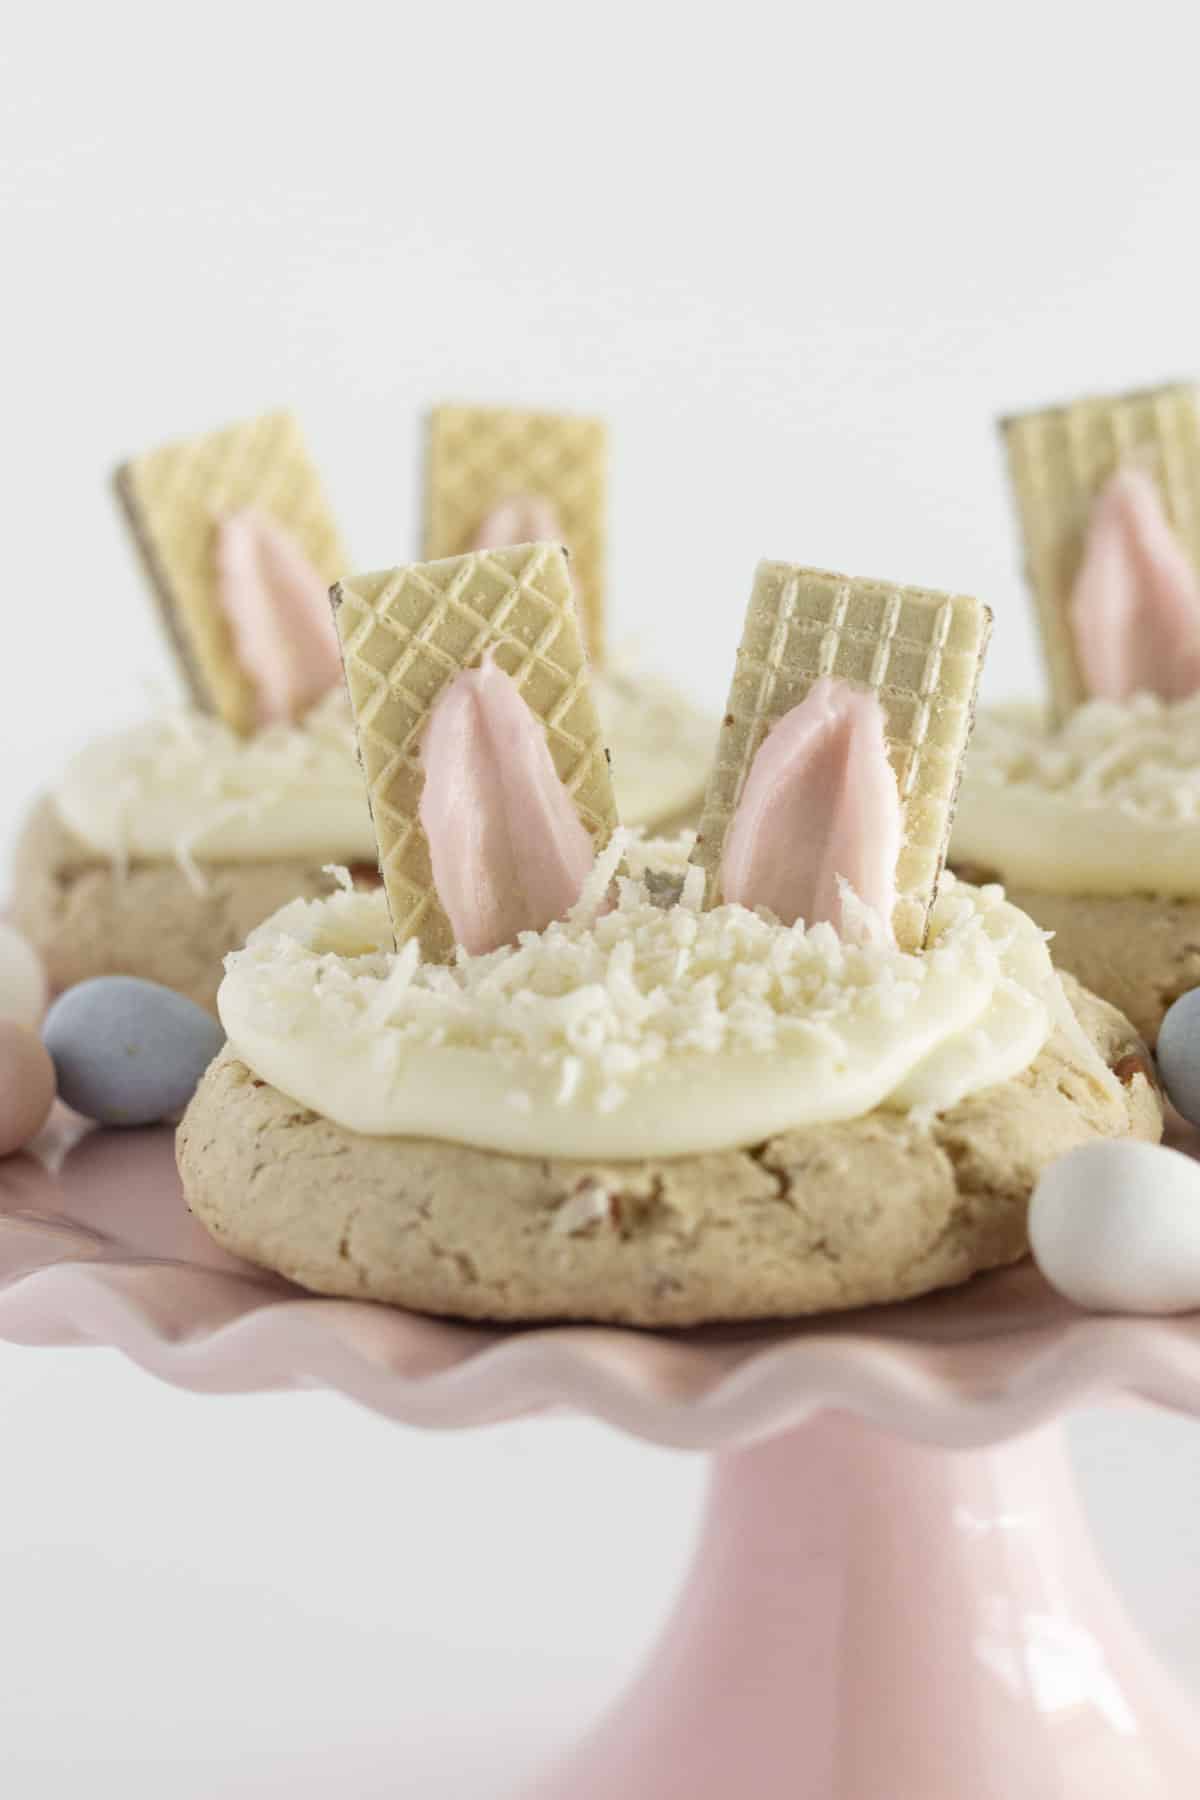 Three Bunny Cookies on a pink cake plate with candy eggs.